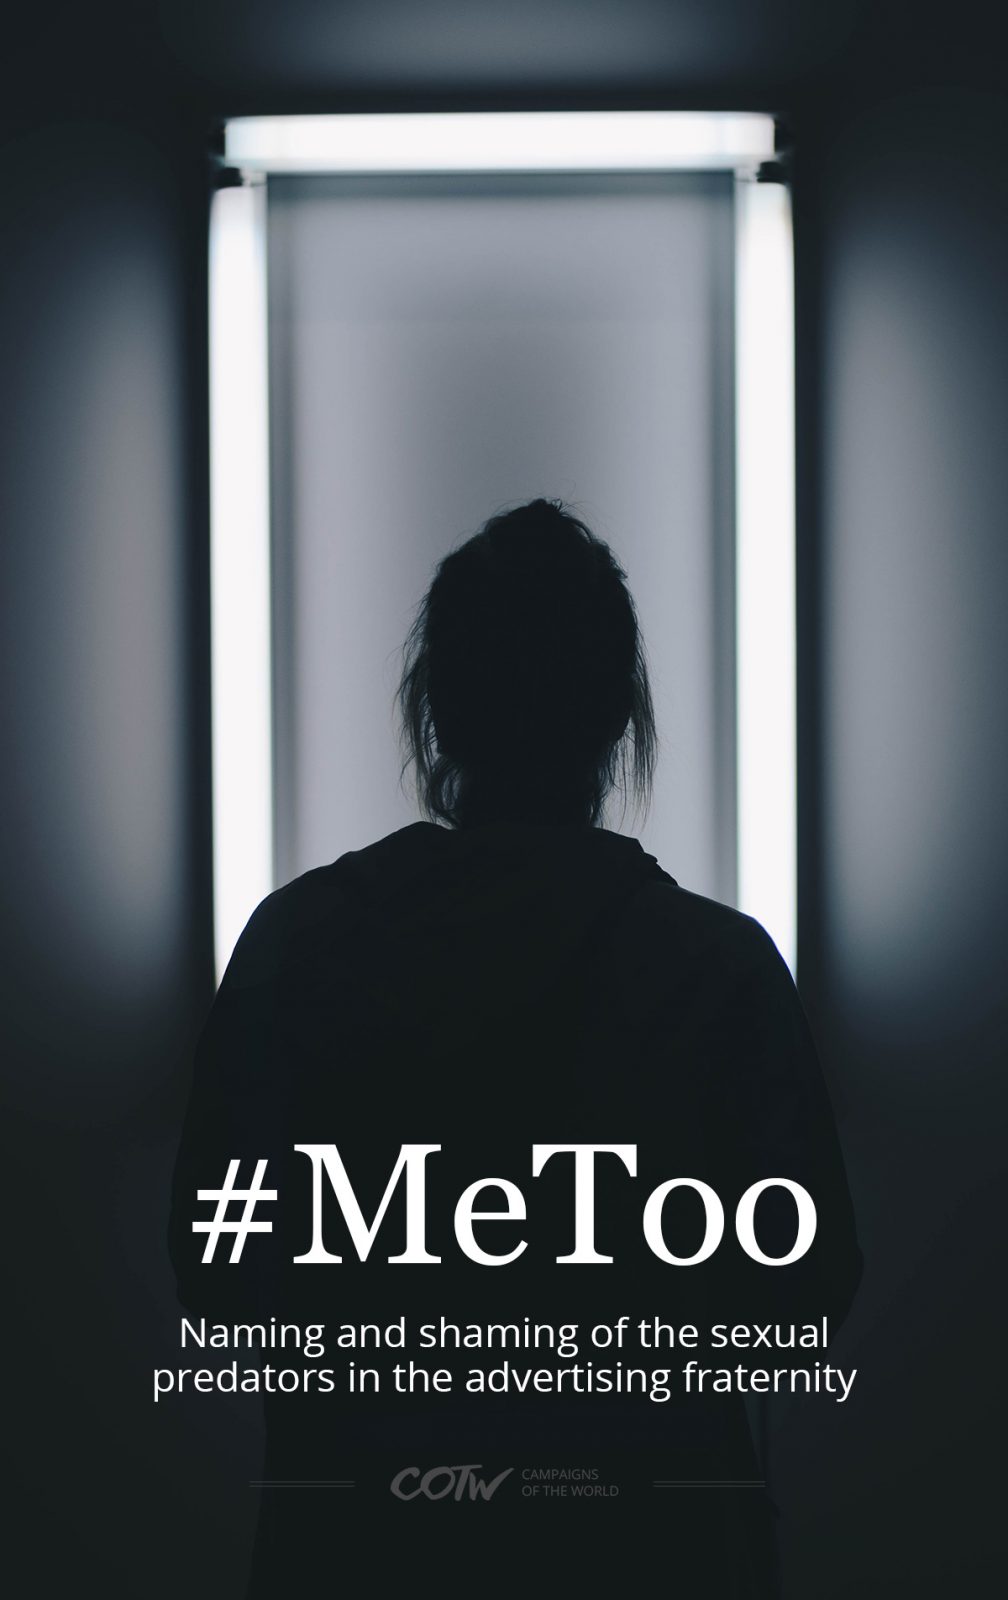 Advertising fraternity stunned by many #MeToo stories